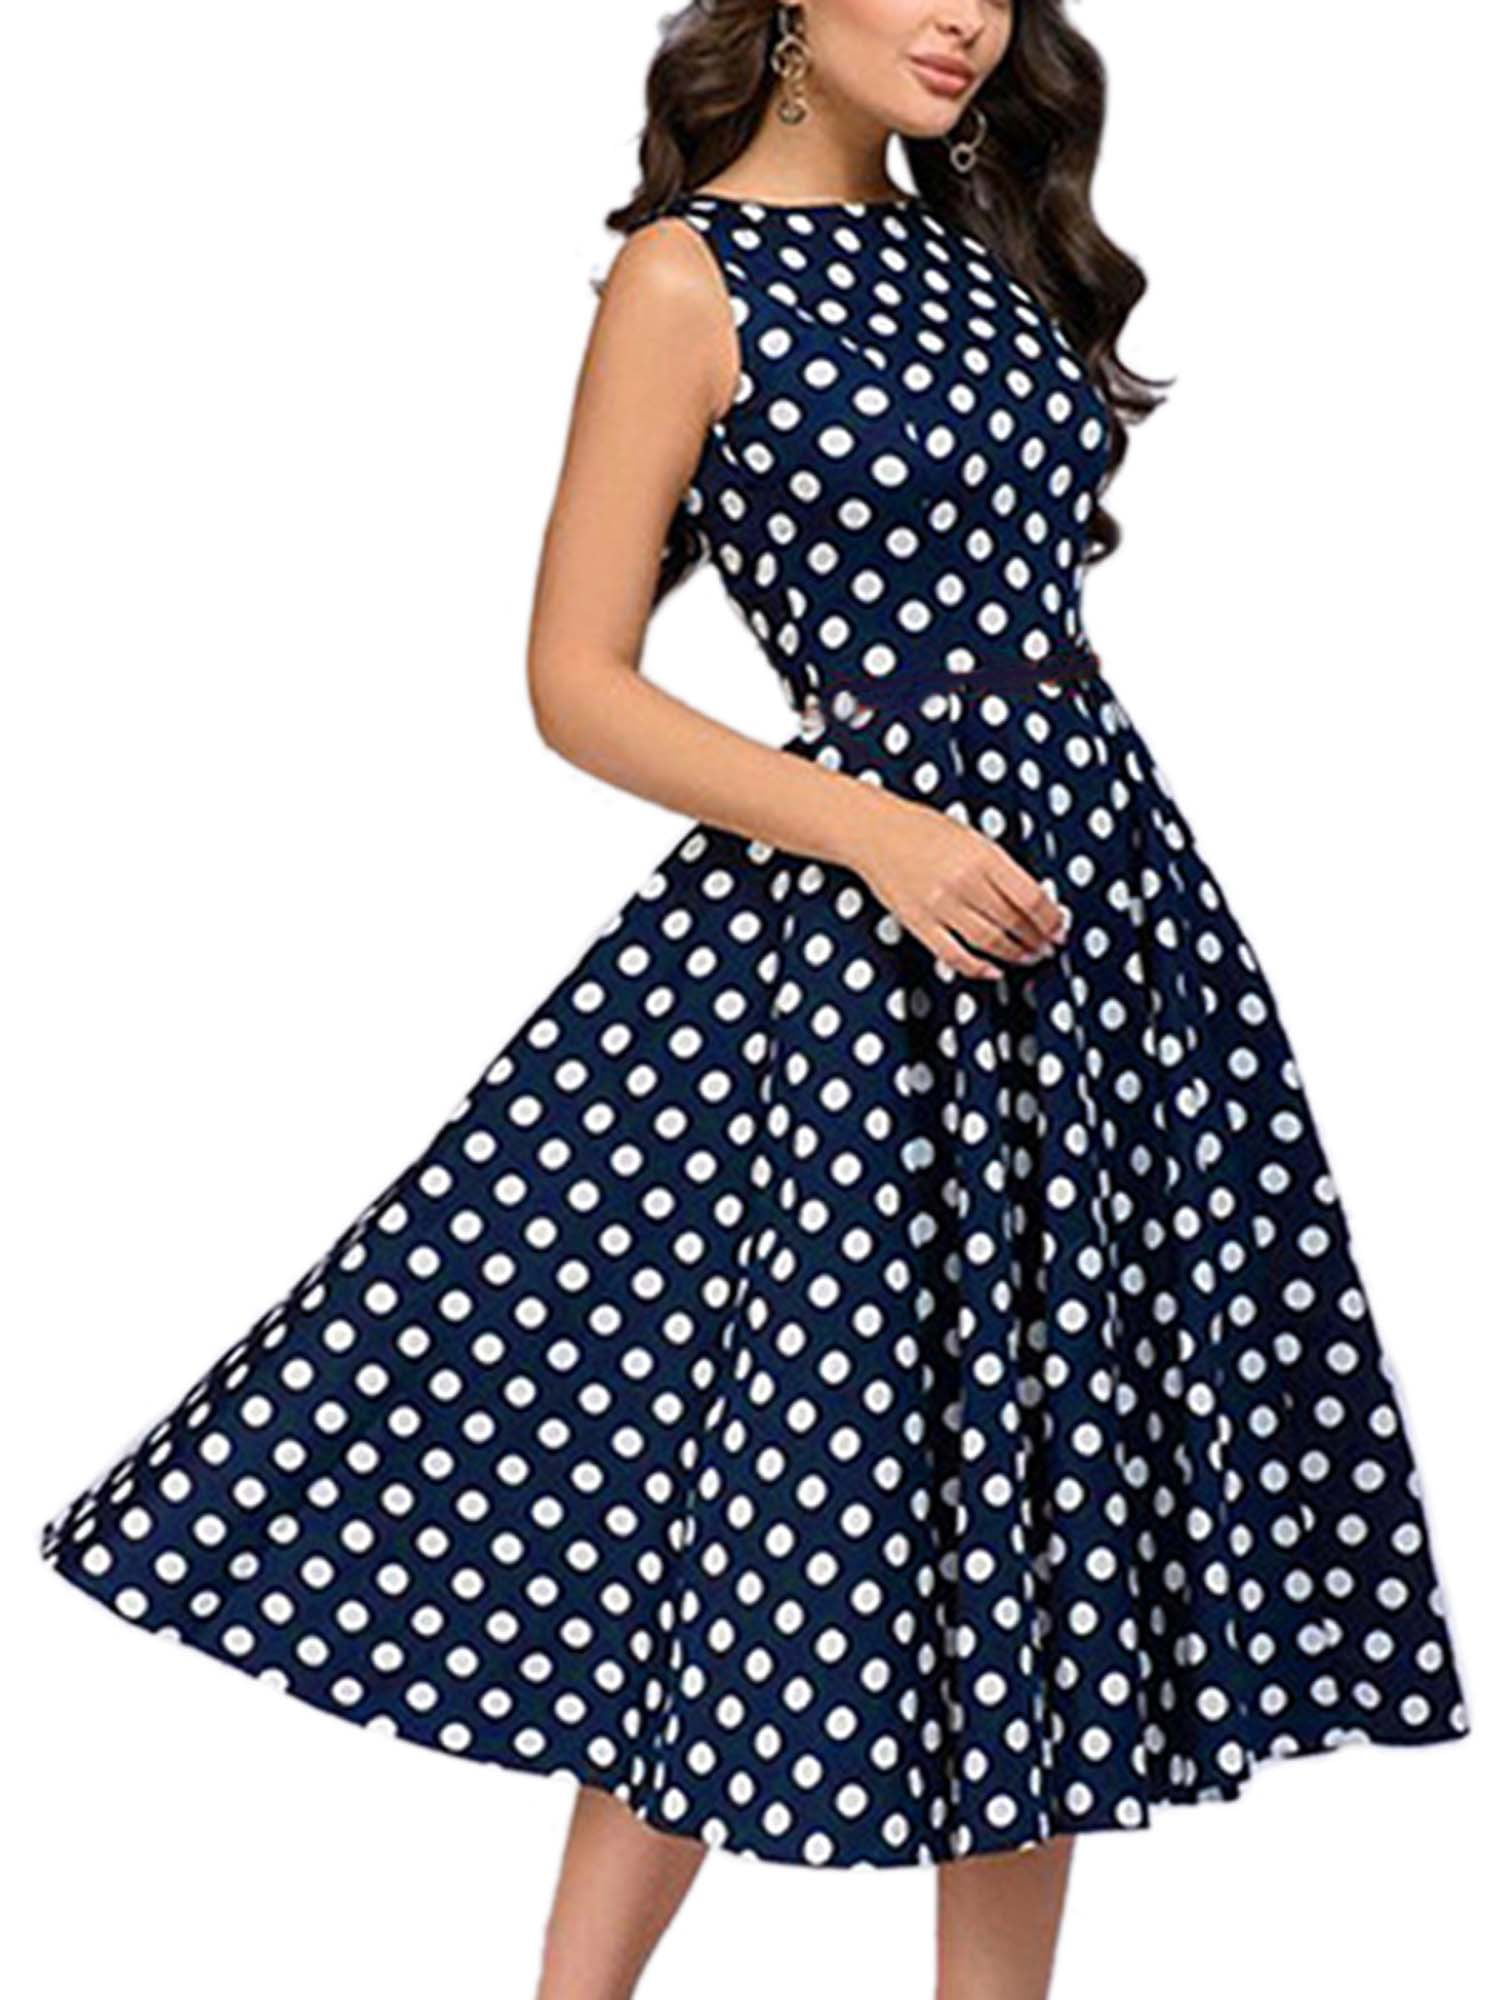 Women's 50s 60s Vintage Polka Dot Party Cocktail Ball Gown Swing Midi ...